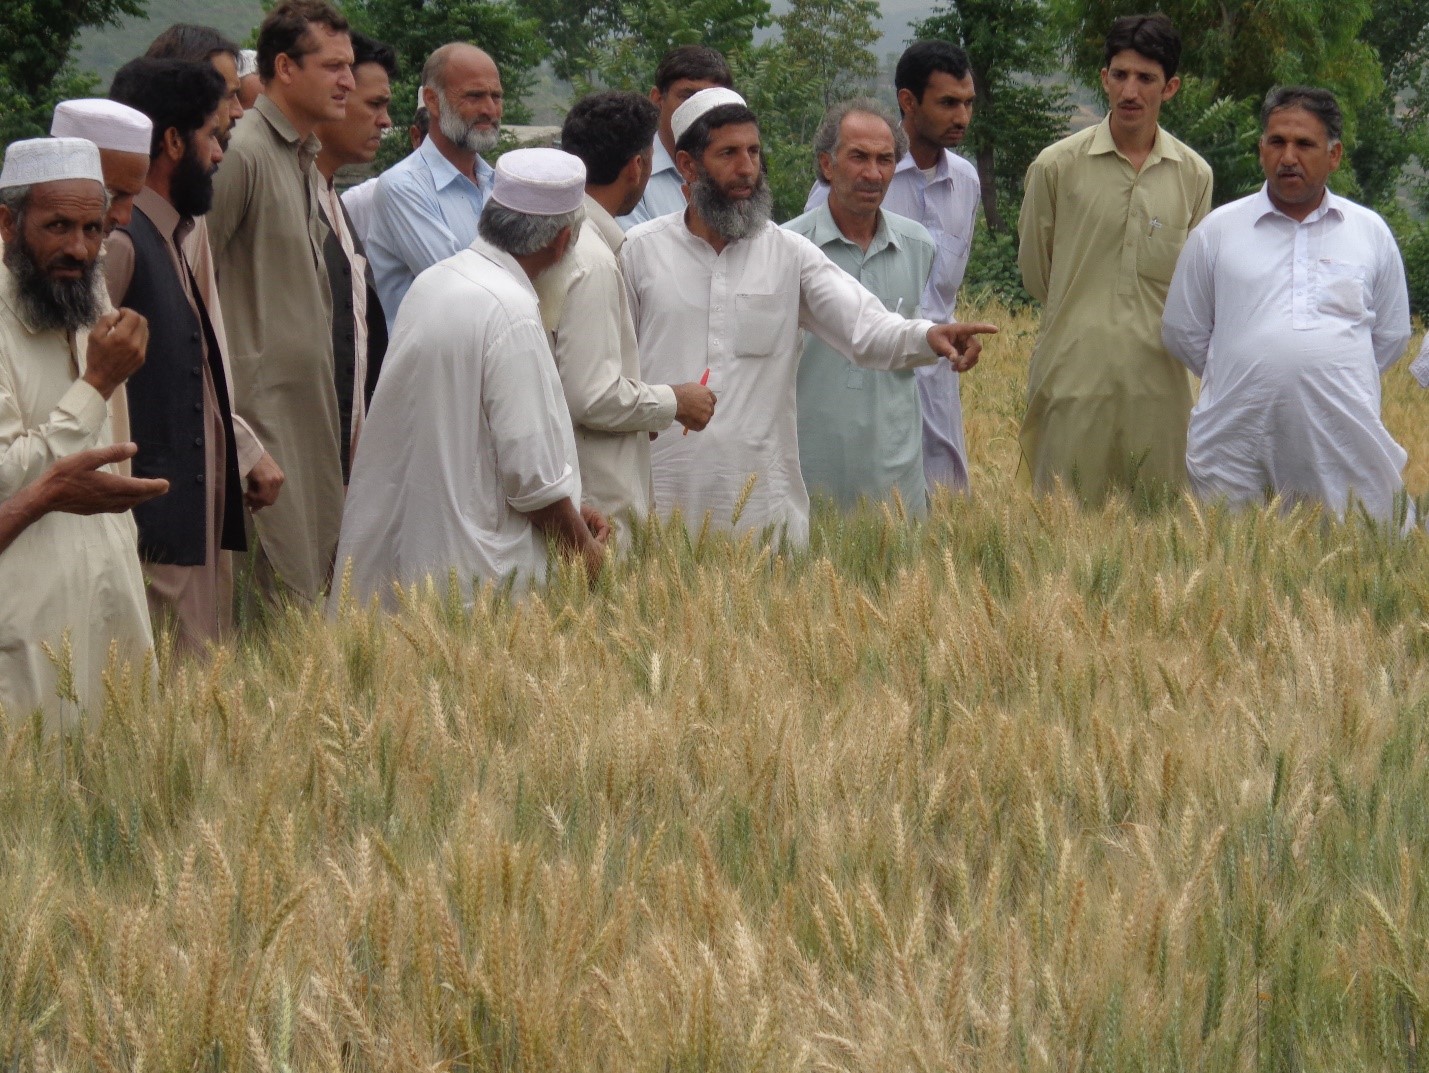 Want to learn more about CIMMYT's activities in Pakistan? Check out our news feed here. Photo: CIMMYT